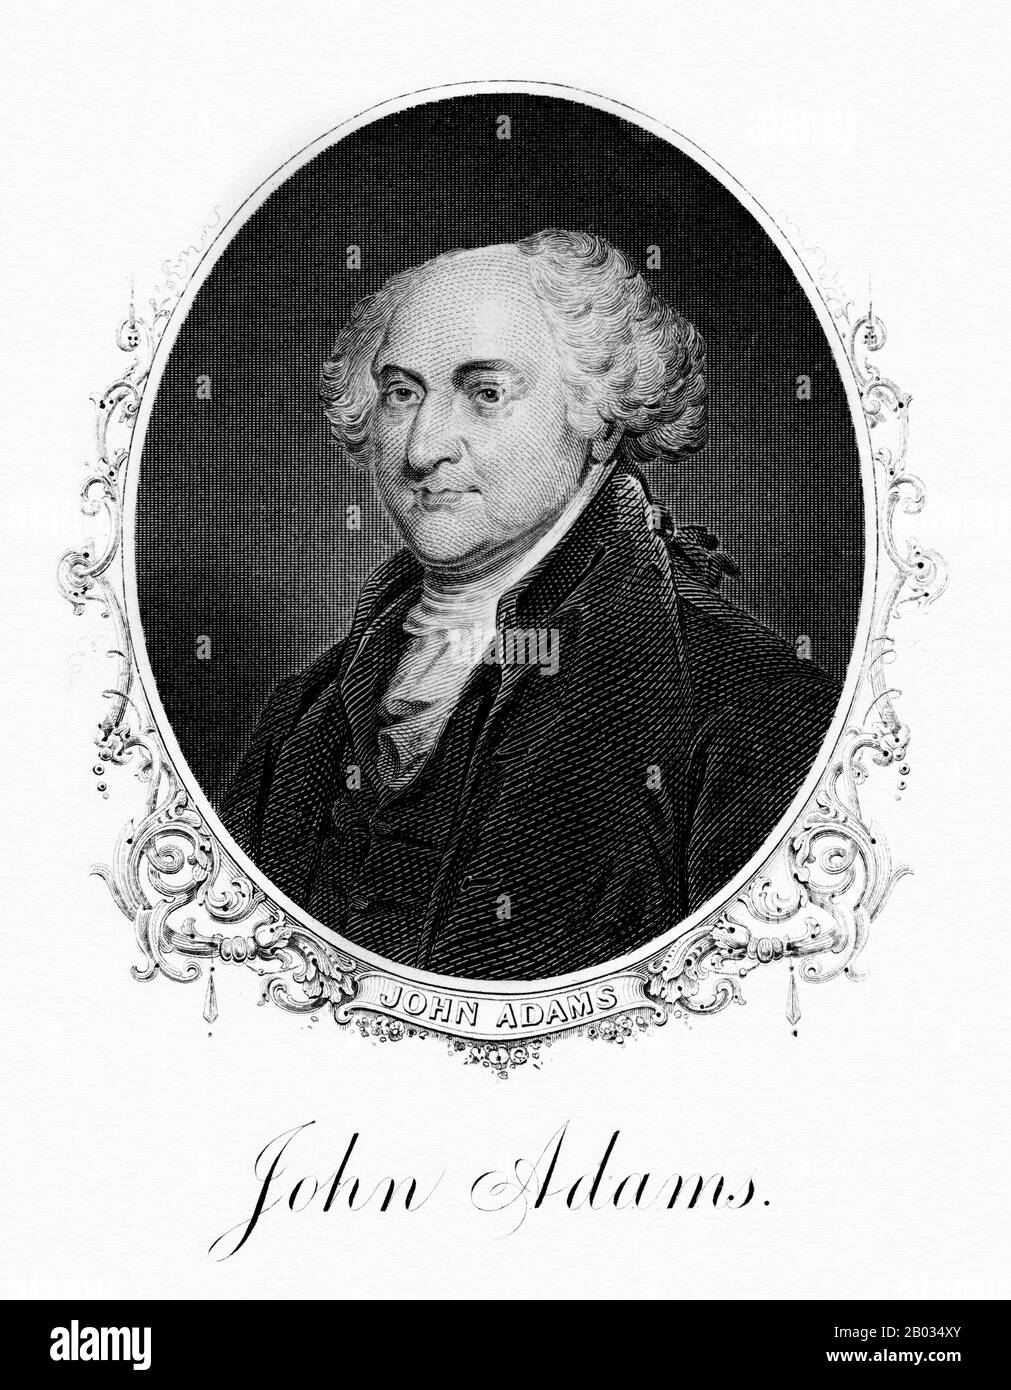 John Adams (October 30 – July 4, 1826) was an American lawyer, author,  statesman, and diplomat. He served as the second President of the United  States (1797–1801), the first Vice President (1789–97),